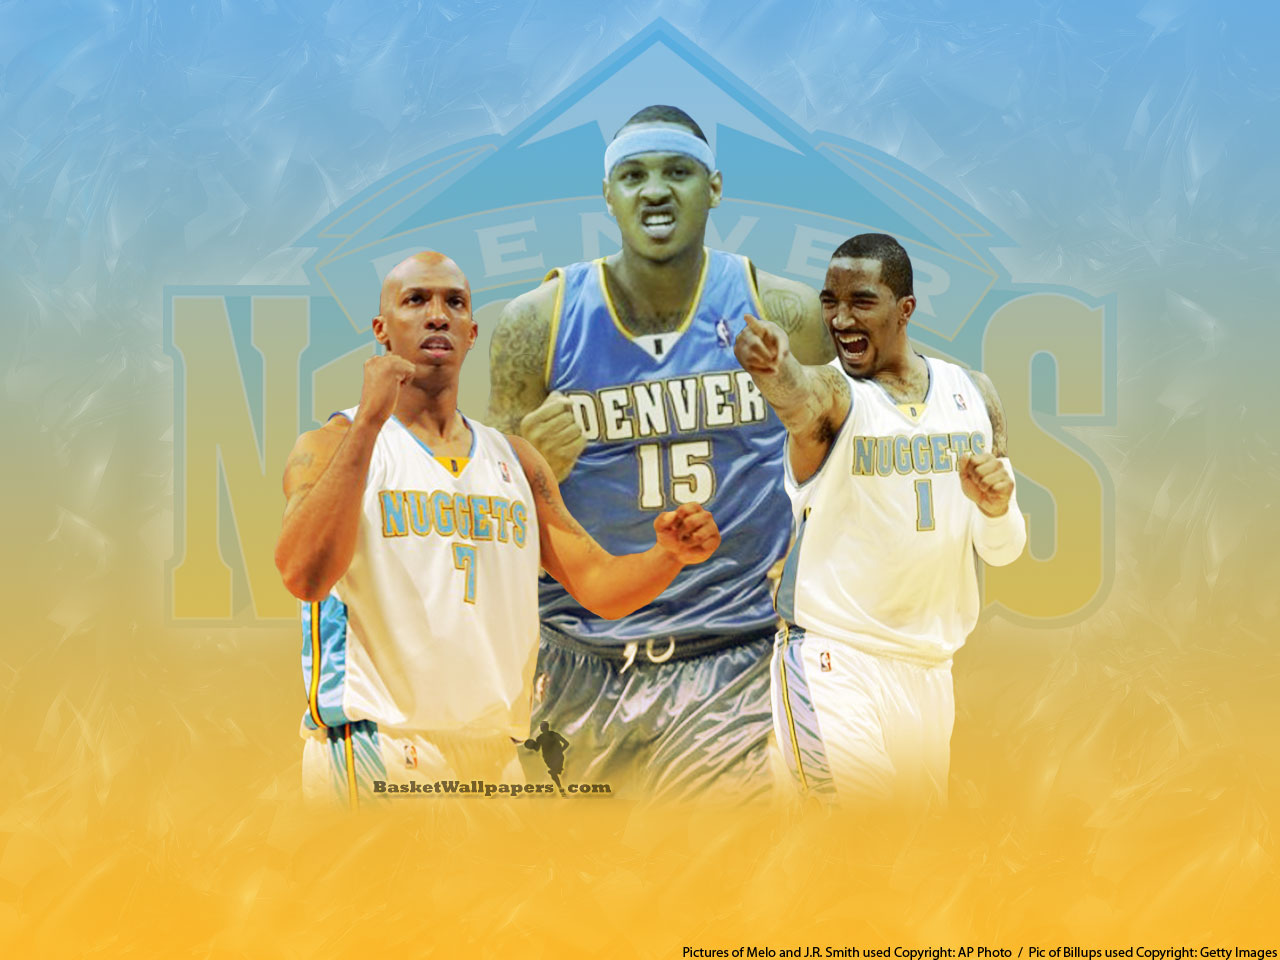 Free Download Carmelo Anthony Wallpaper The Big 3 Of Denver Images, Photos, Reviews